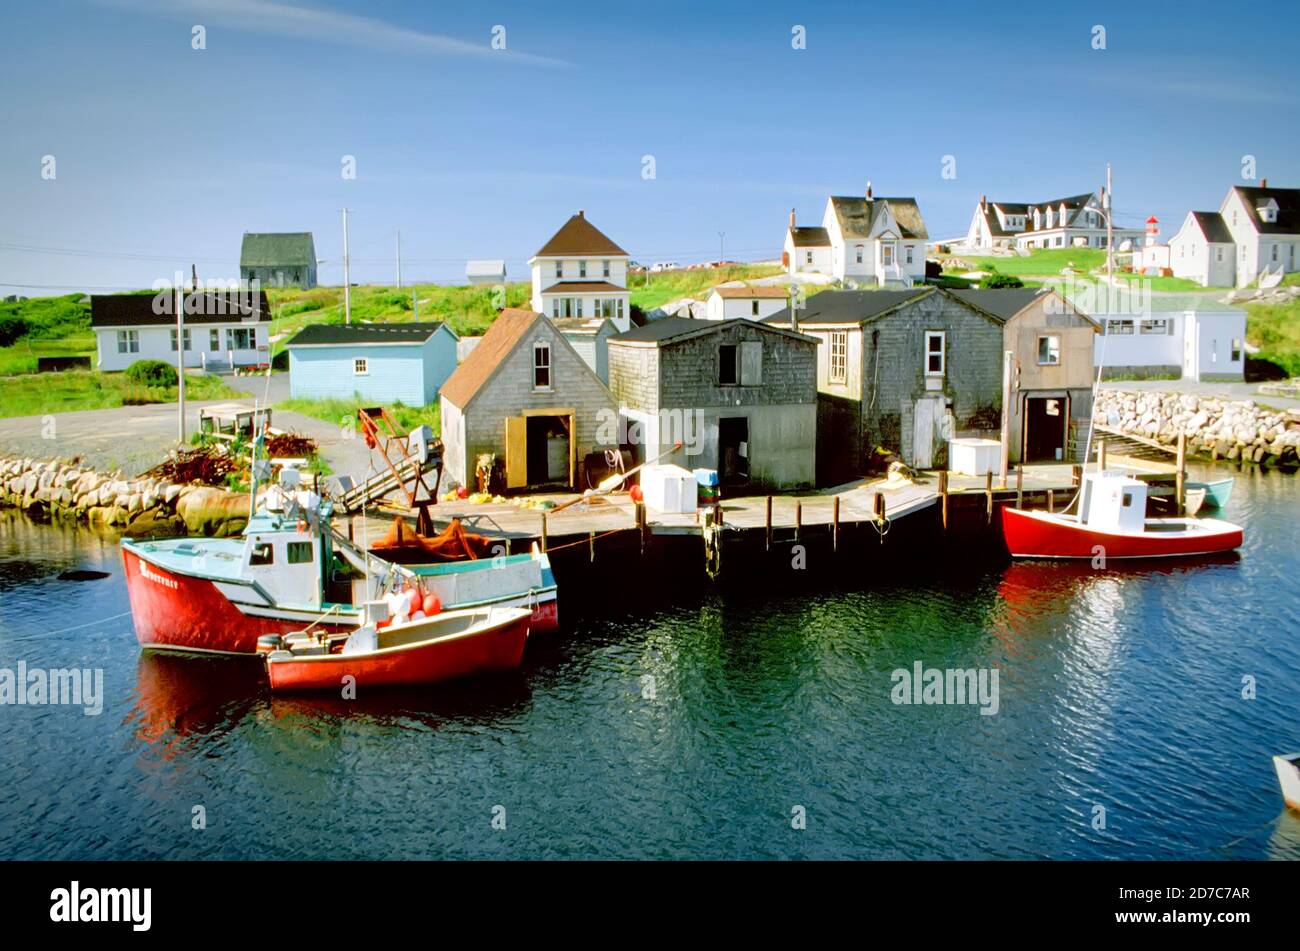 Peggy's Cove is a quaint but typical fishing  village found in Nova Scotia, Canada Stock Photo